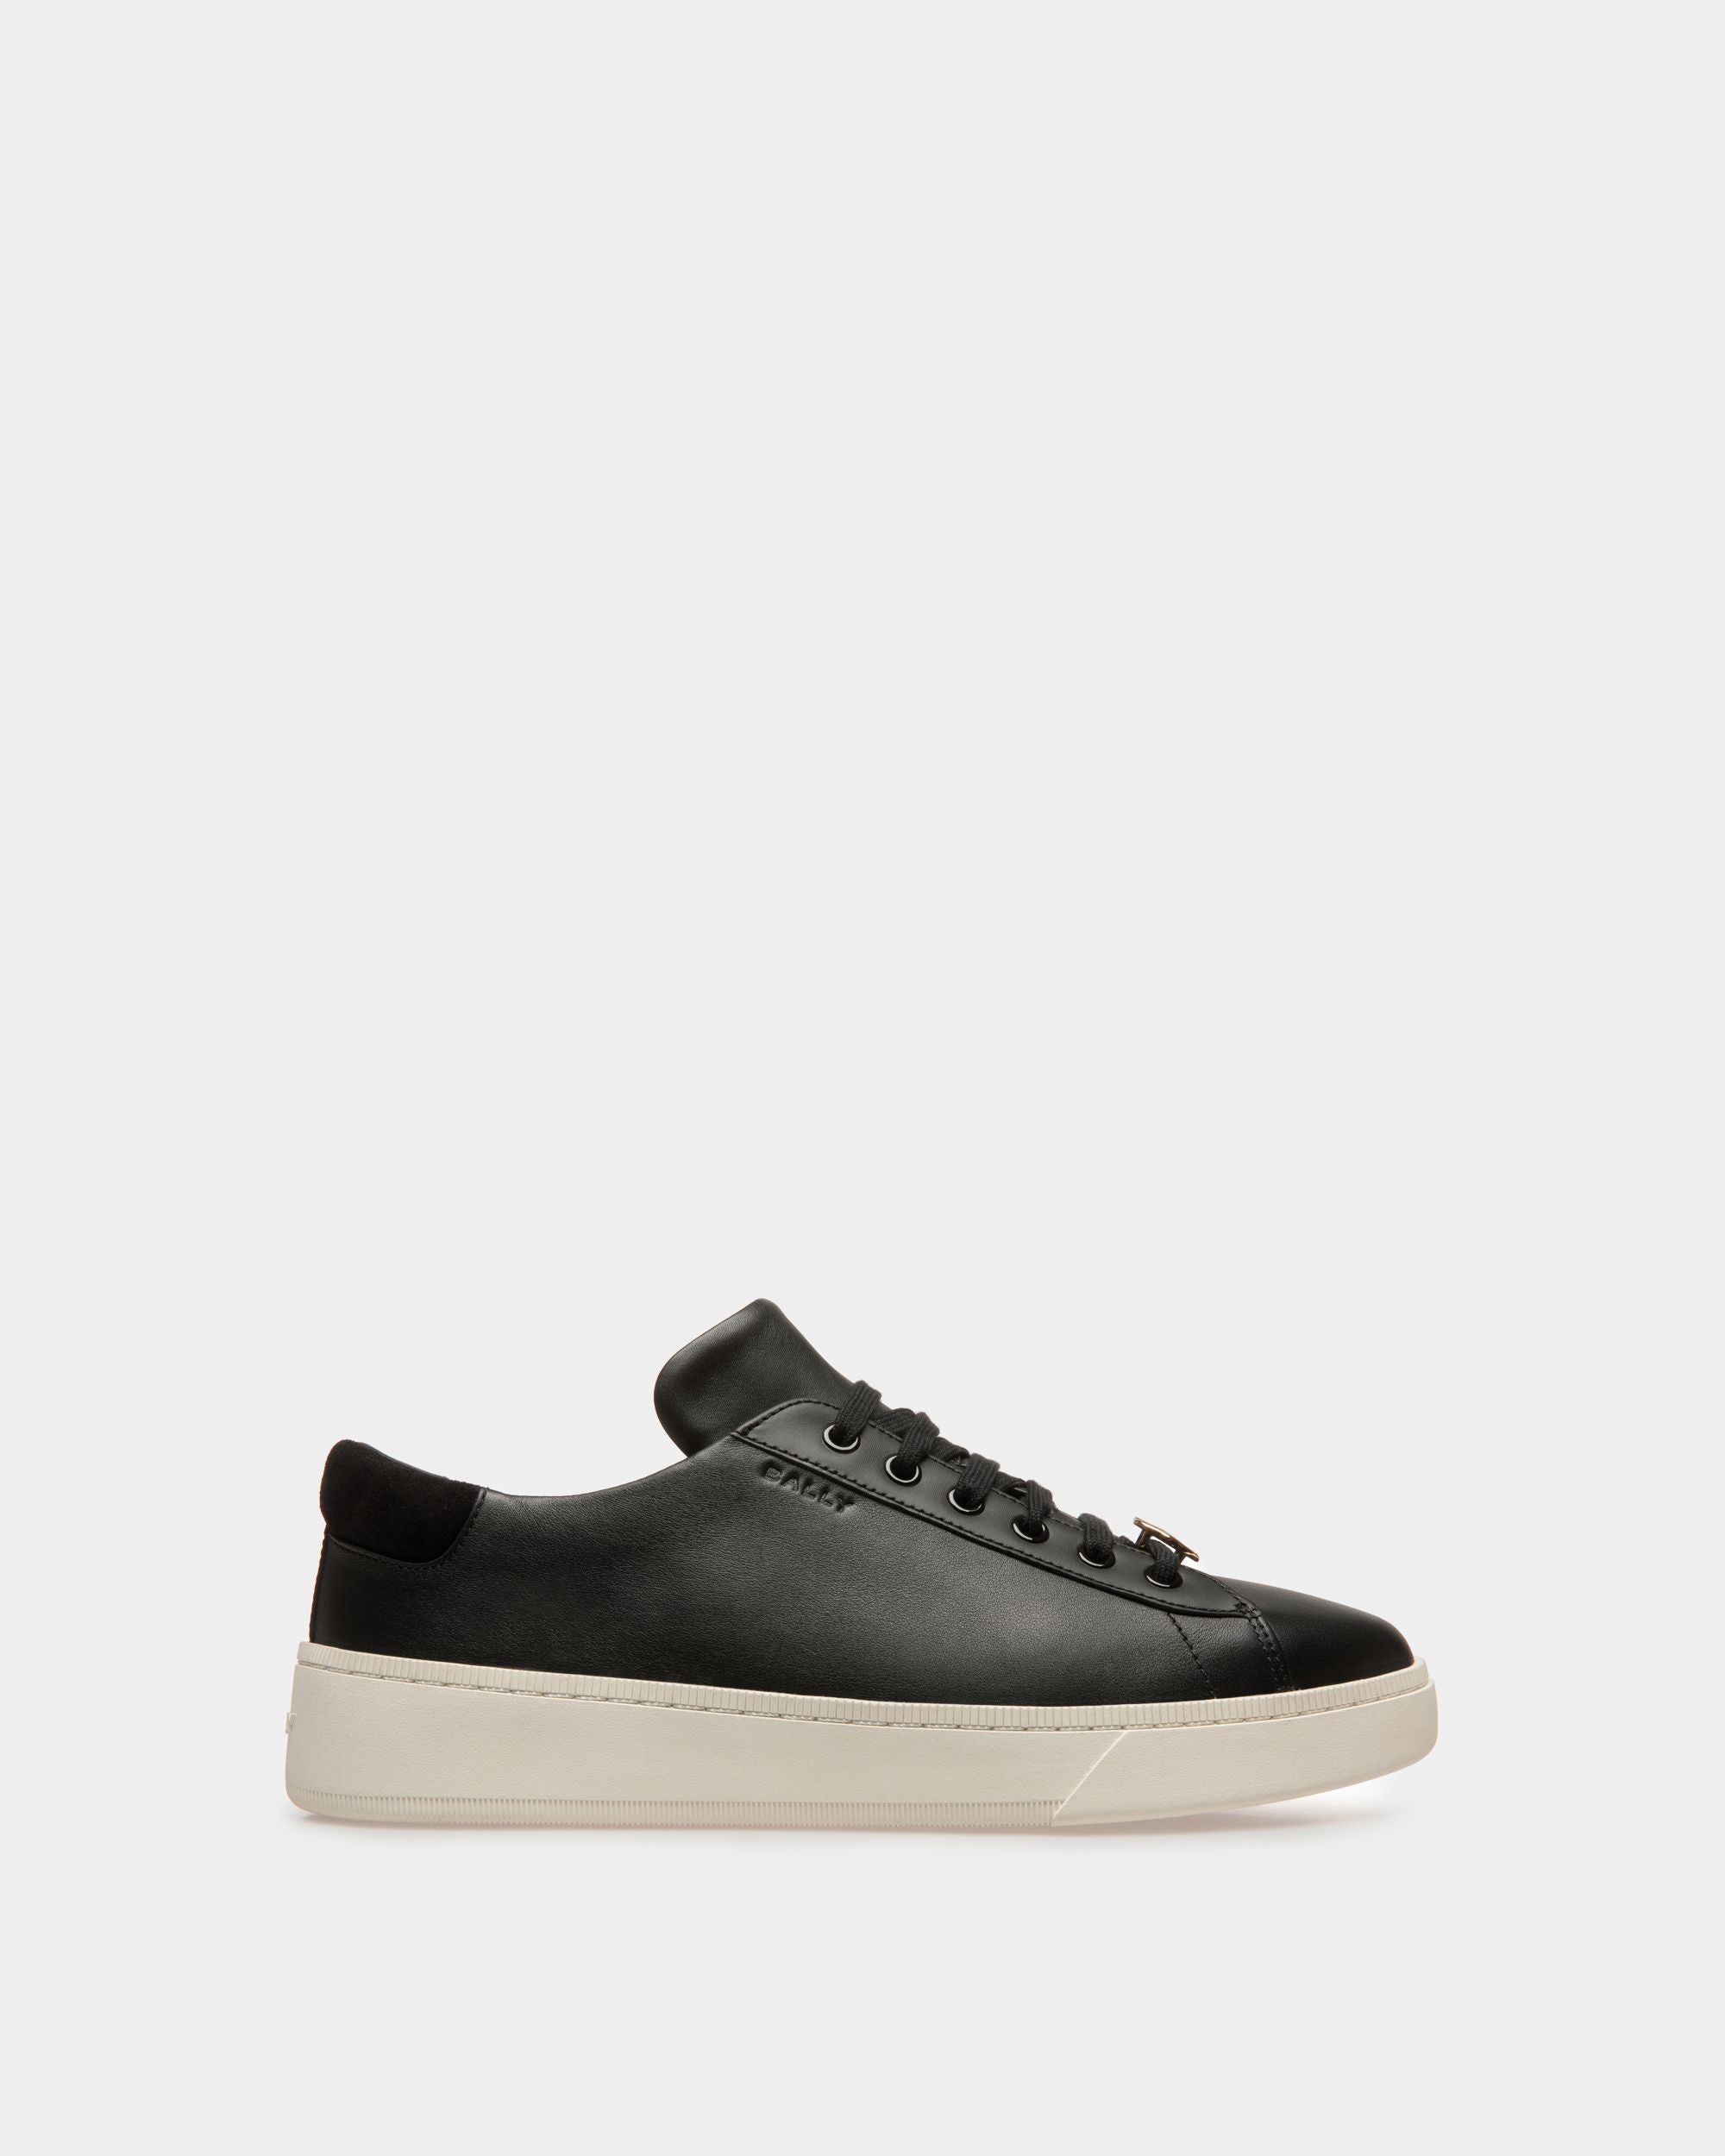 Ryver | Men's Sneakers | Black And White Leather | Bally | Still Life Side